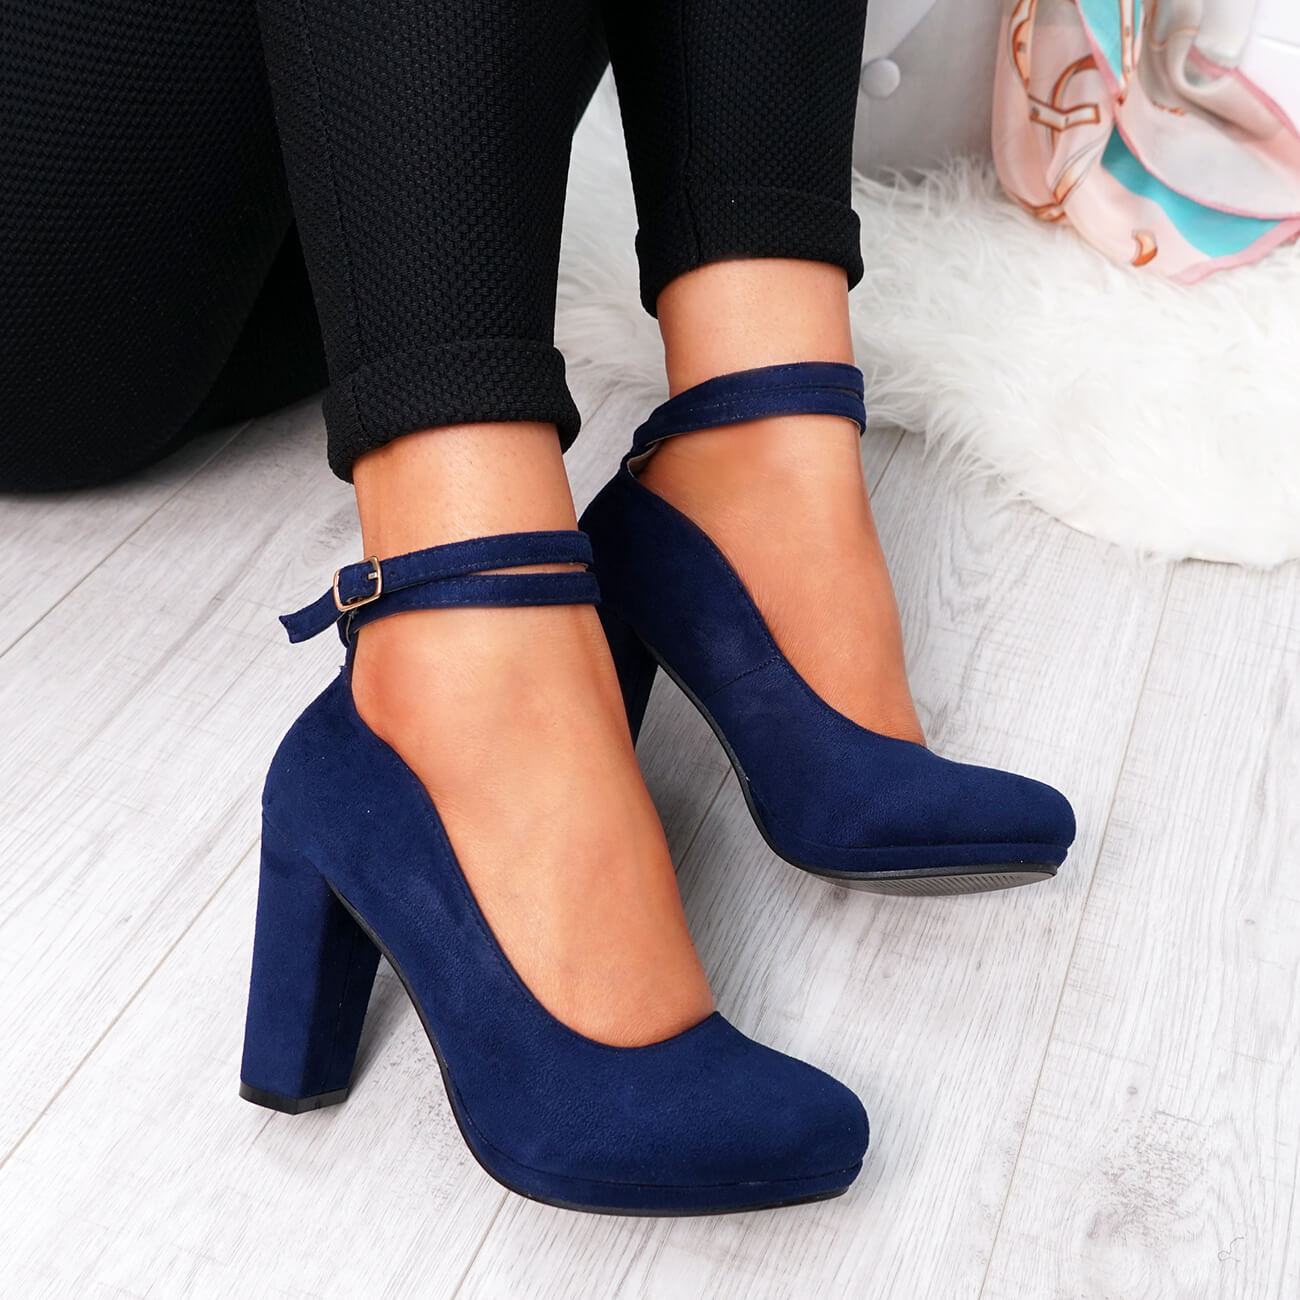 WOMENS LADIES ANKLE STRAP HIGH BLOCK HEELS ROUNDED TOE PUMPS OFFICE